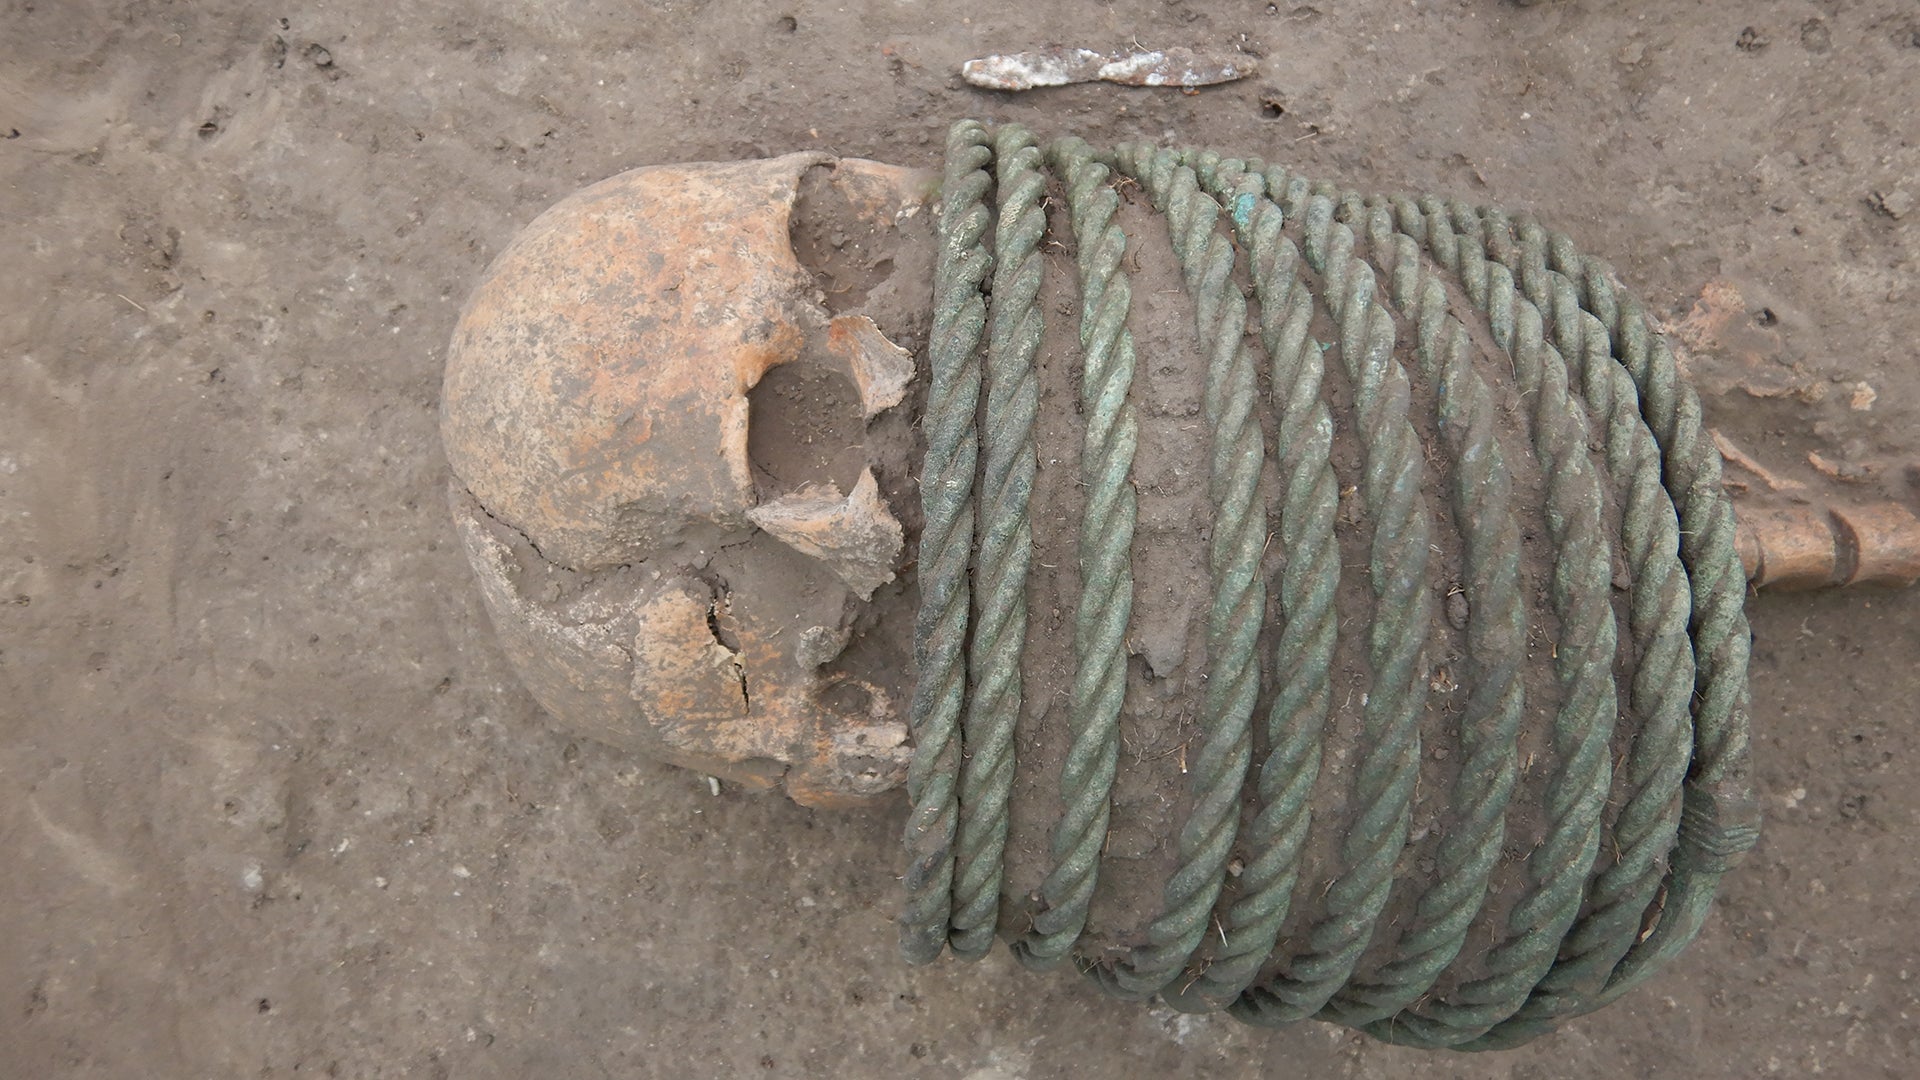 Skeletons in the 1000-year-old grave were found with rings around their necks